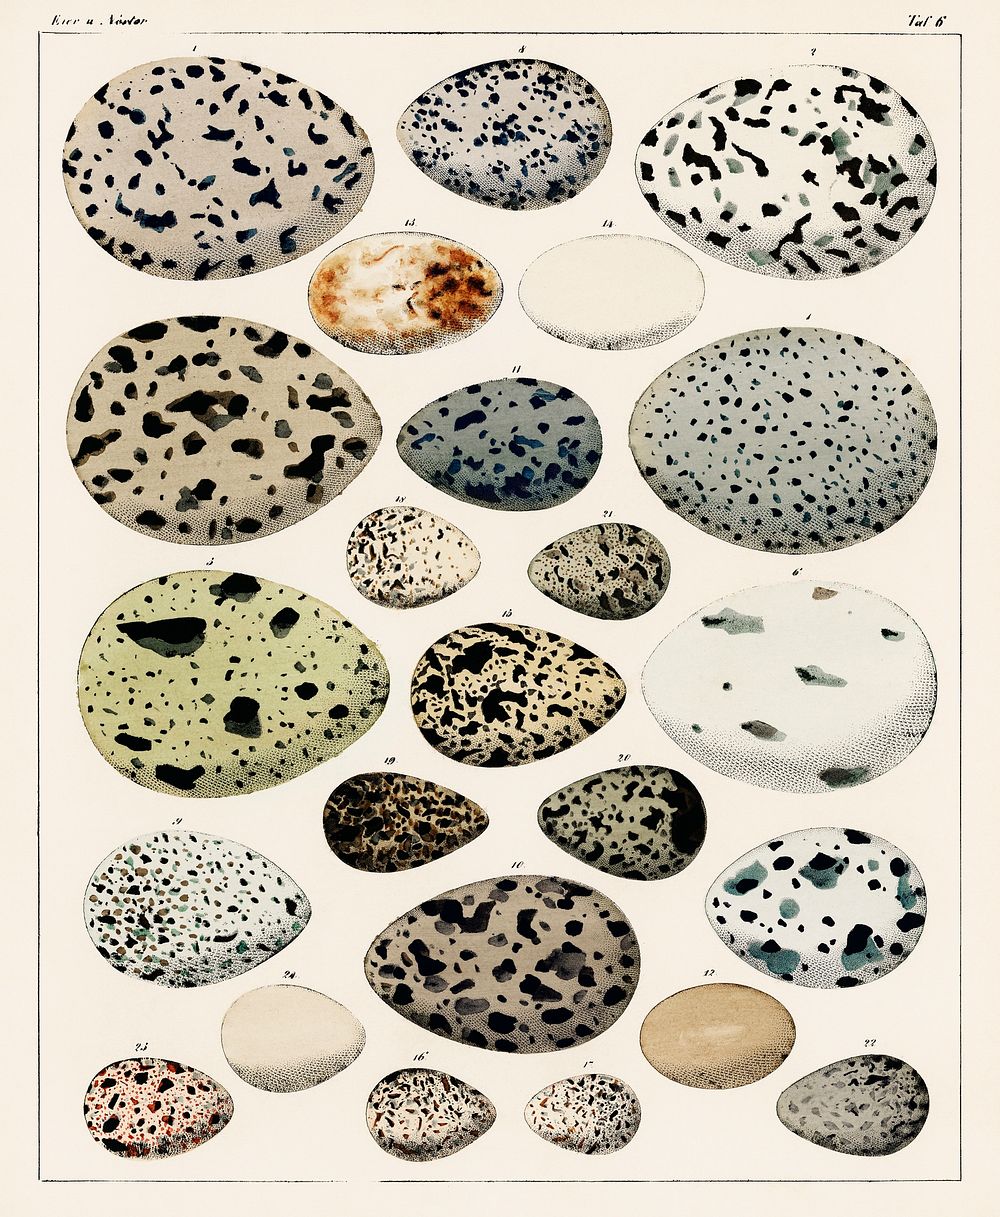 Oken Eggs - taf. 6 (1843) by Lorenz Oken (1779-1851), a collection of different eggs of different species of birds.…